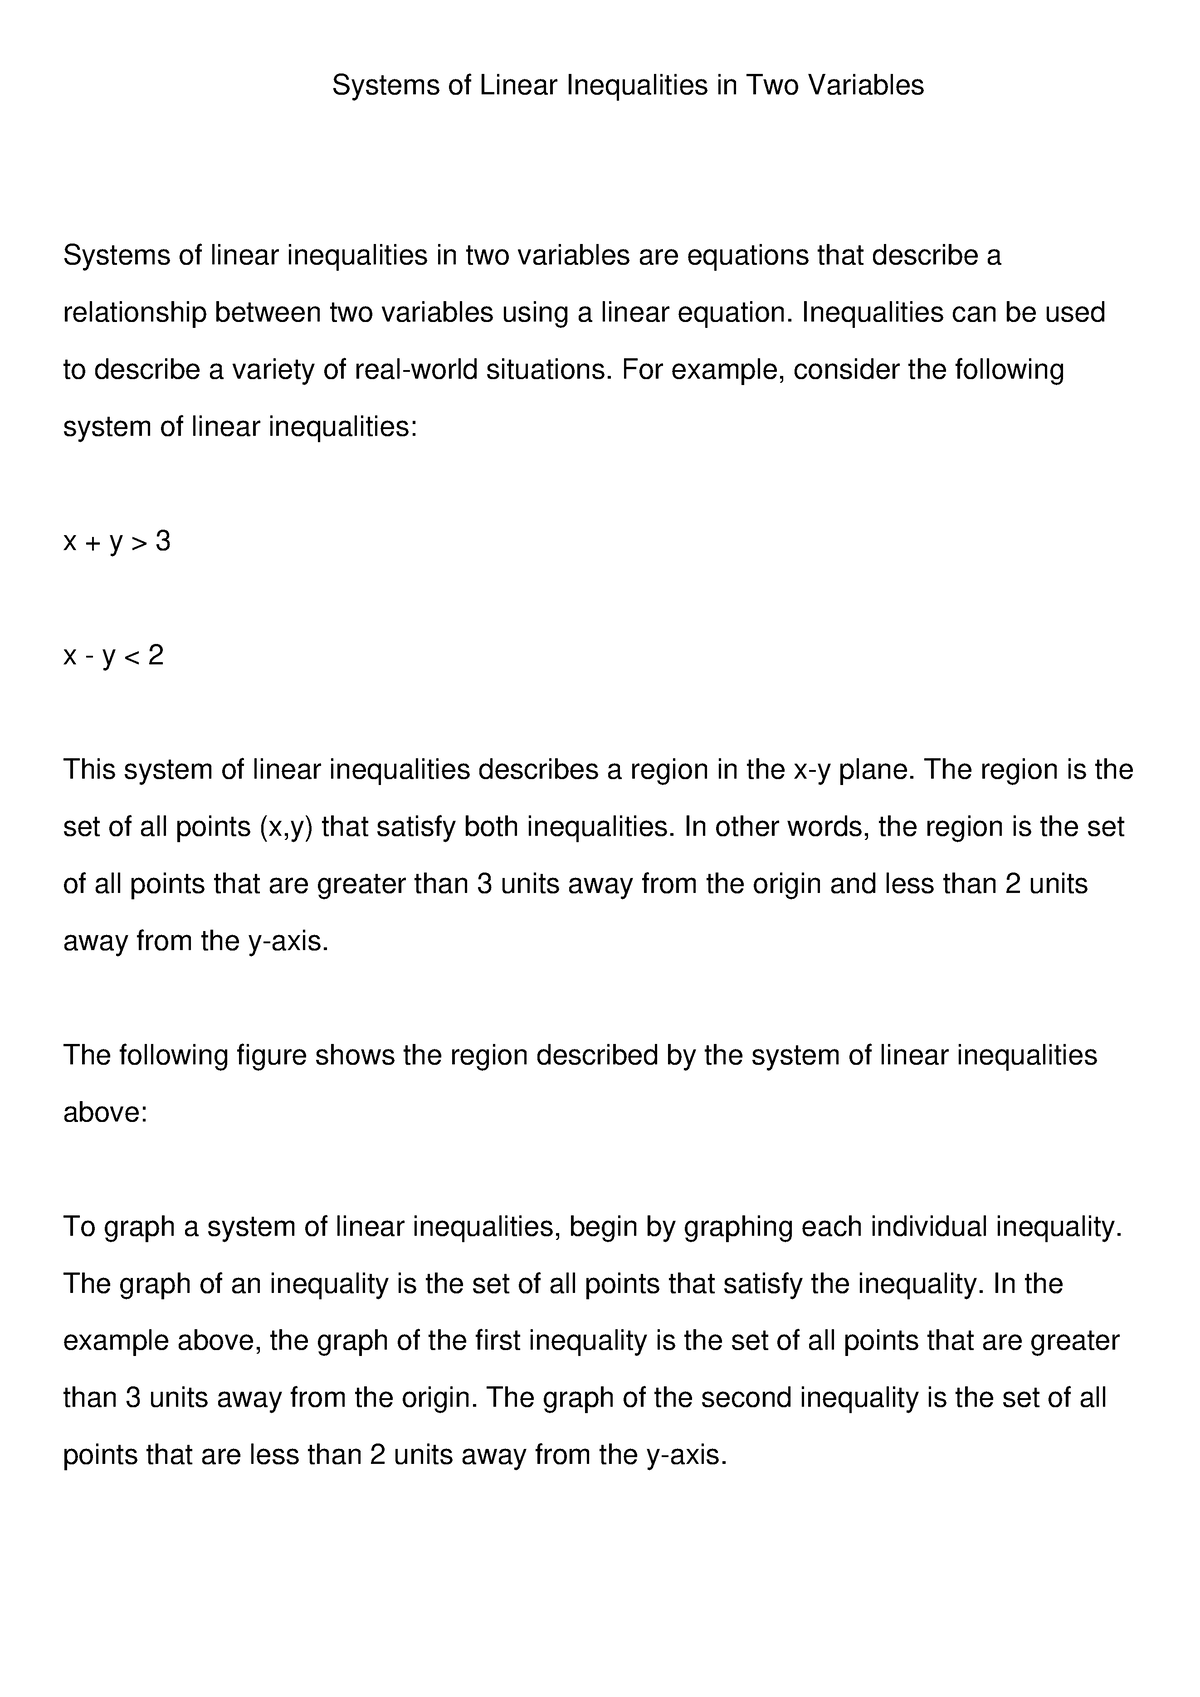 graphing-systems-of-inequalities-in-3-easy-steps-mashup-math